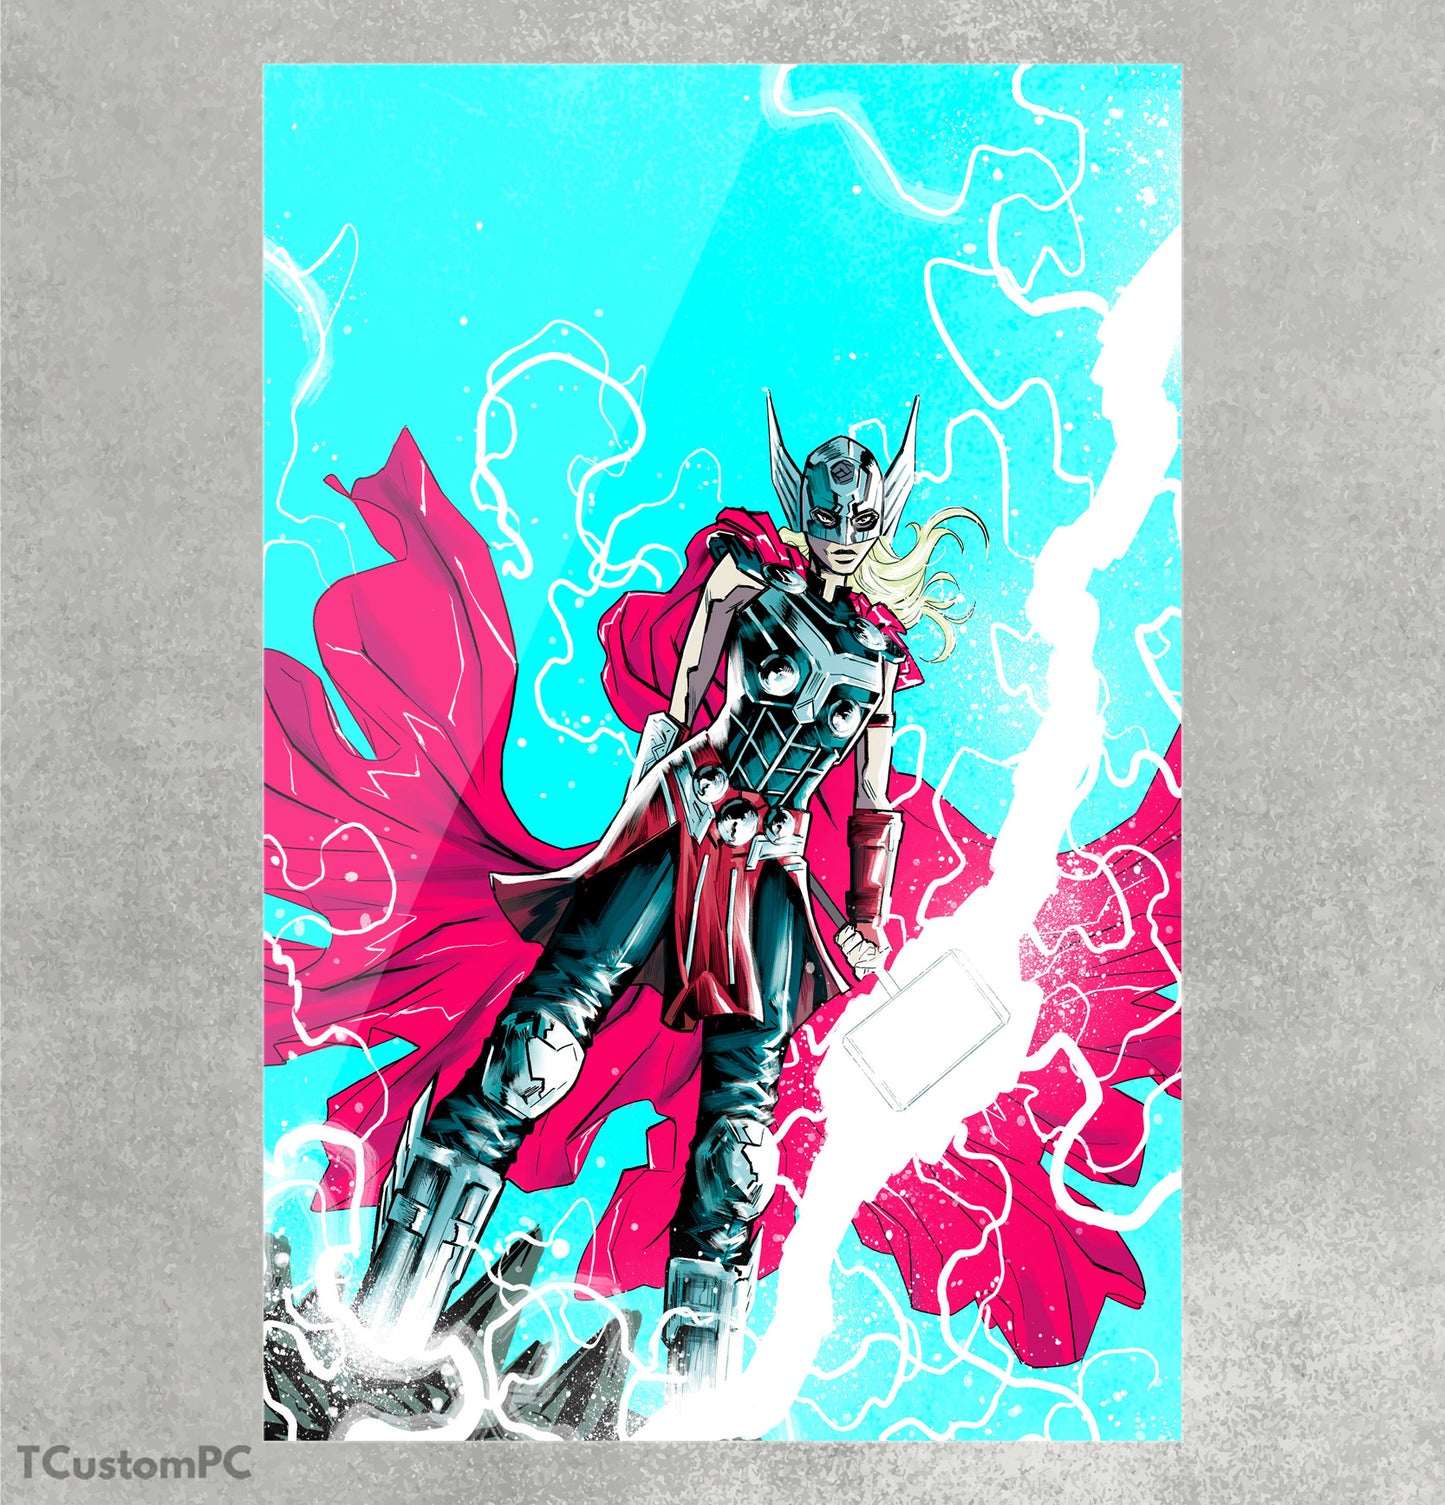 Thor 2 painting